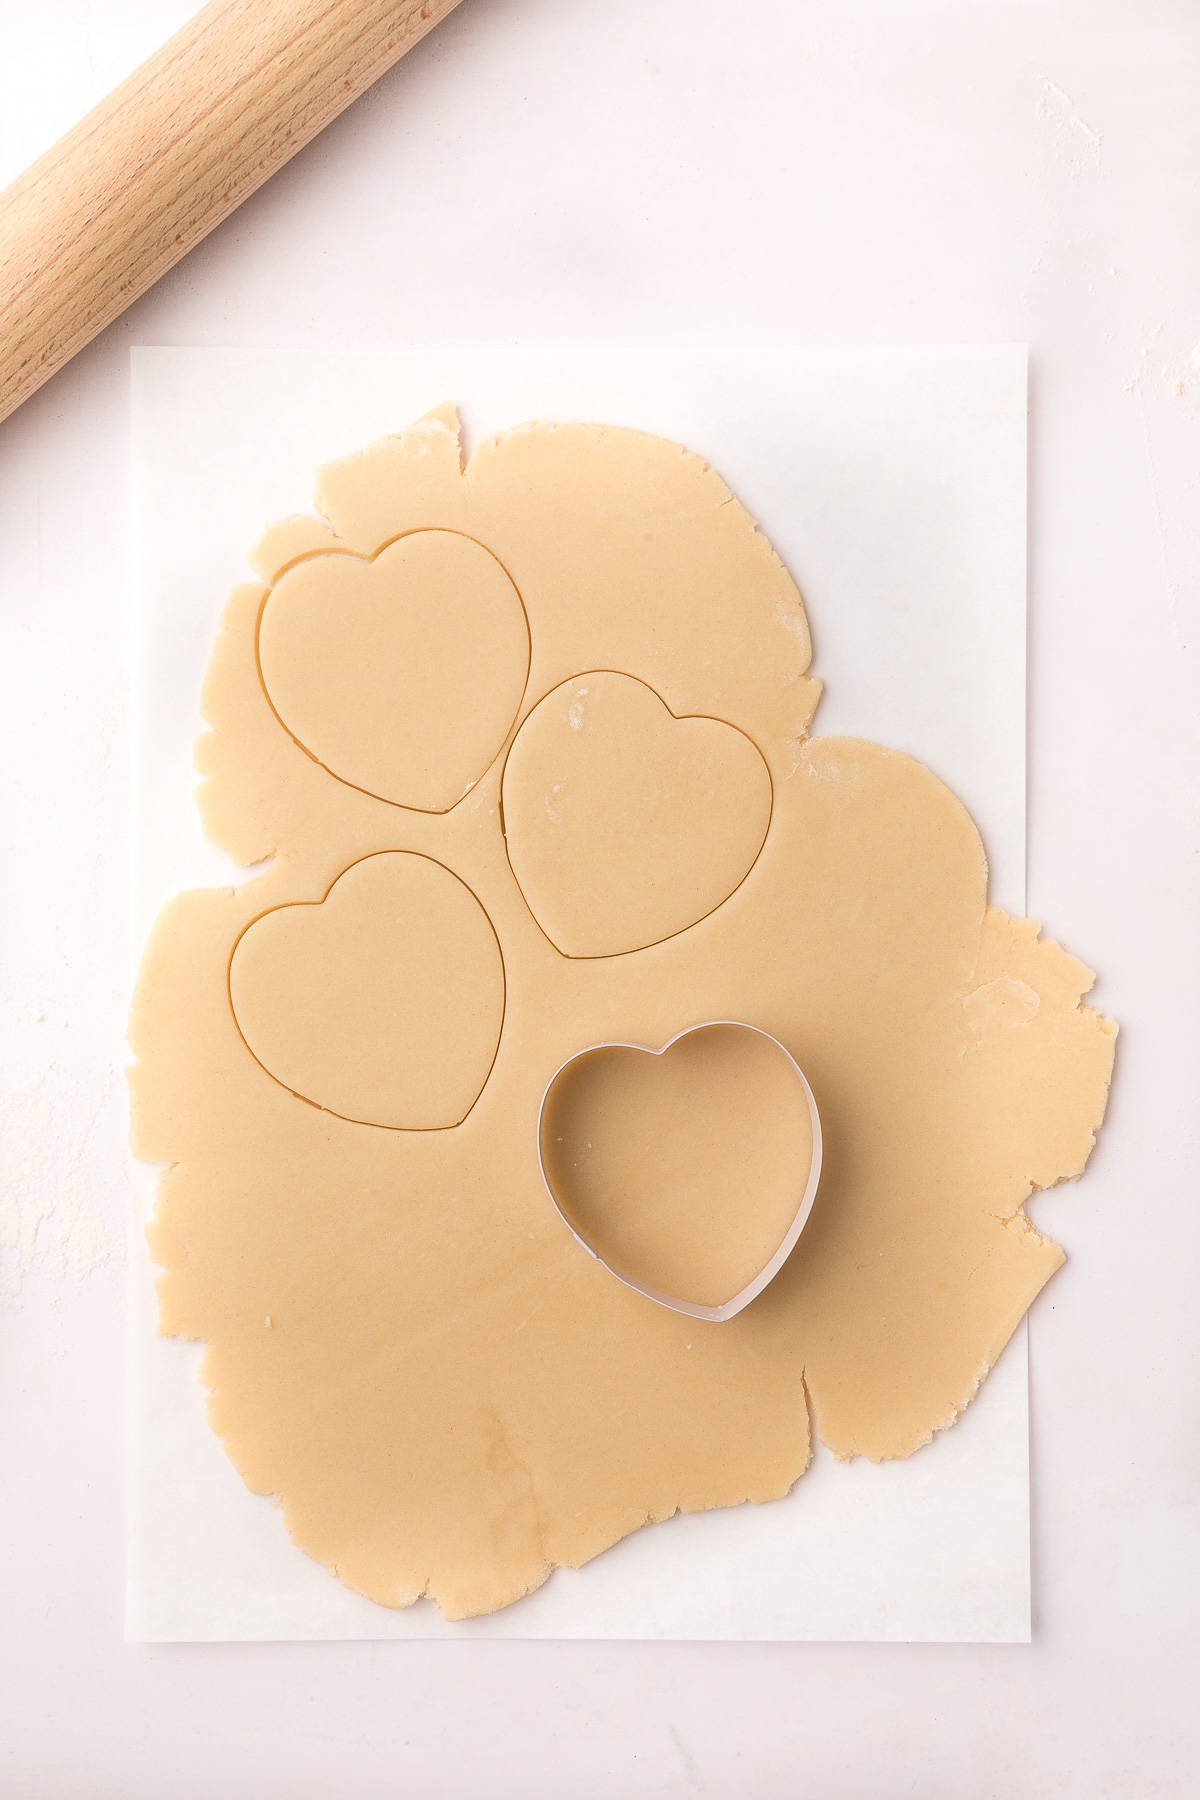 Heart shaped metal cookie cutter on dough.